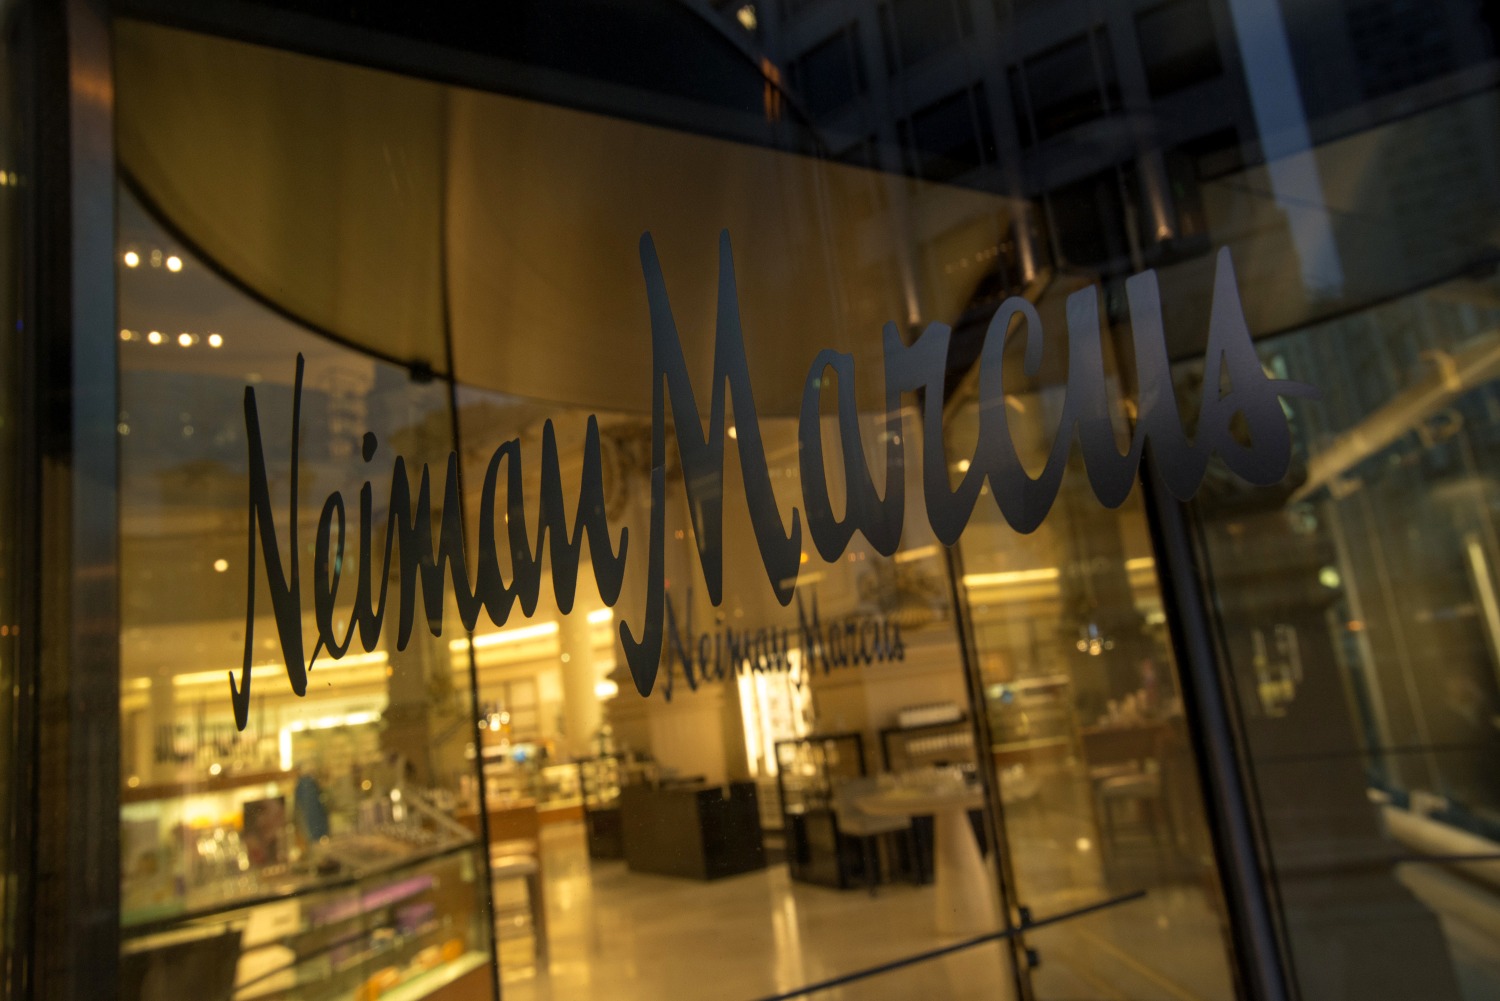 Neiman Marcus CEO Stepping Down